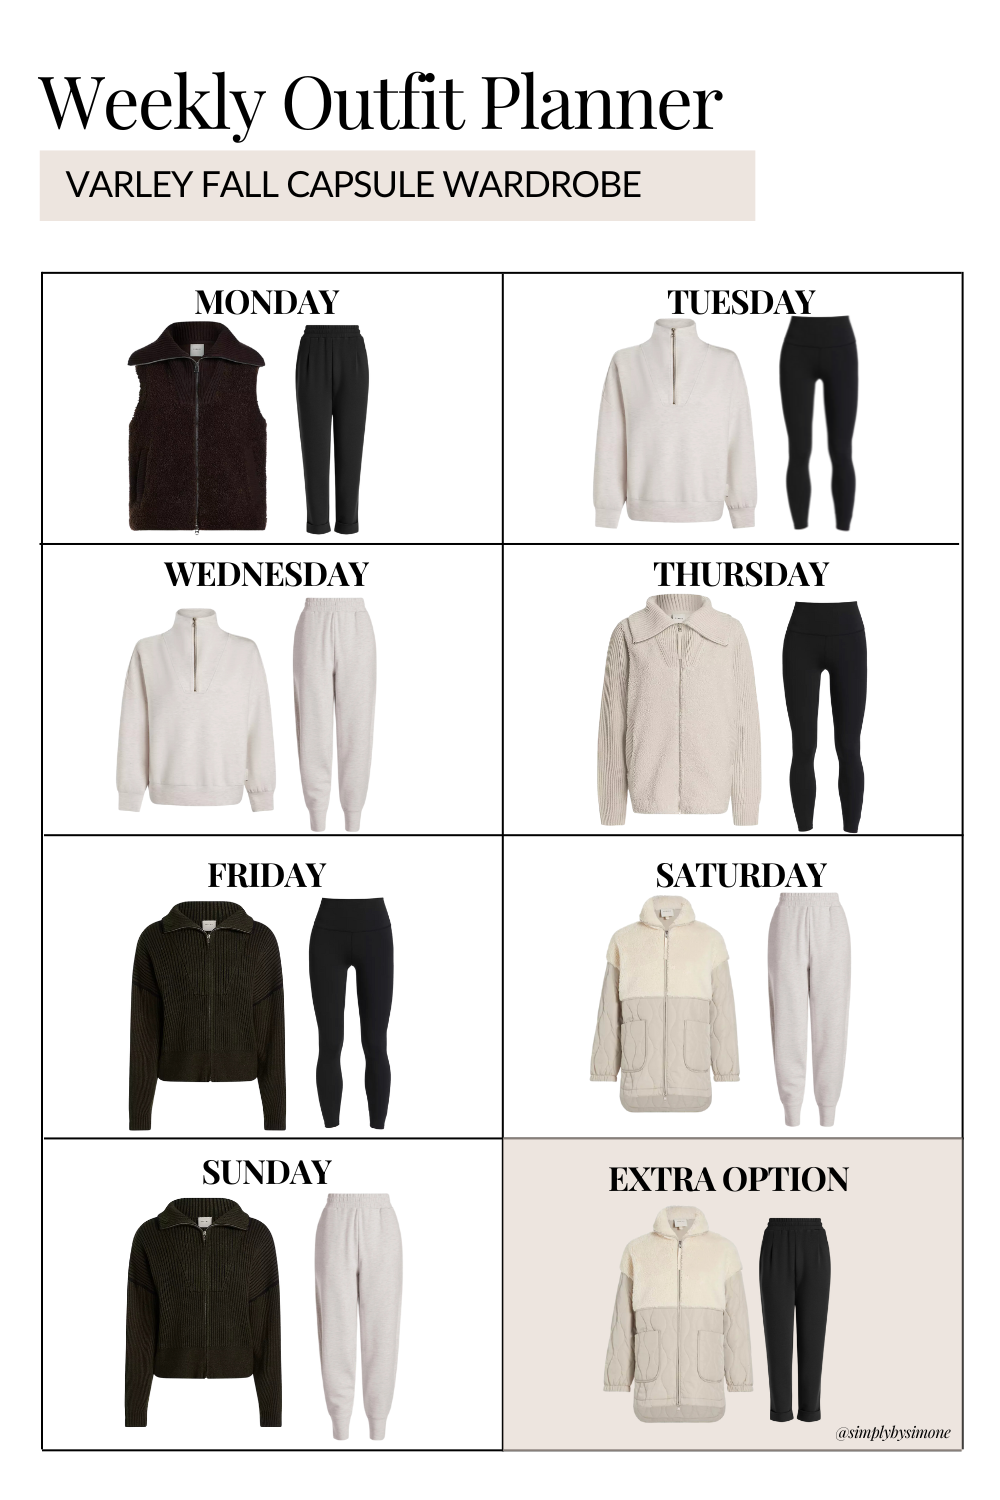 Varley Fall Capsule Wardrobe | Casual Fall Capsule Wardrobe | How to Build a Capsule Wardrobe | Varley Fall Clothes | Outfit Inspiration | 48 Fall Weather Outfit Ideas | Fall Vacation Packing Guide | Varley Fall Capsule Wardrobe - What To Wear This Fall 2023 | Casual Outfit Ideas | Athleisure Wear Capsule Wardrobe | Simply by Simone | Weekly Outfit Planner